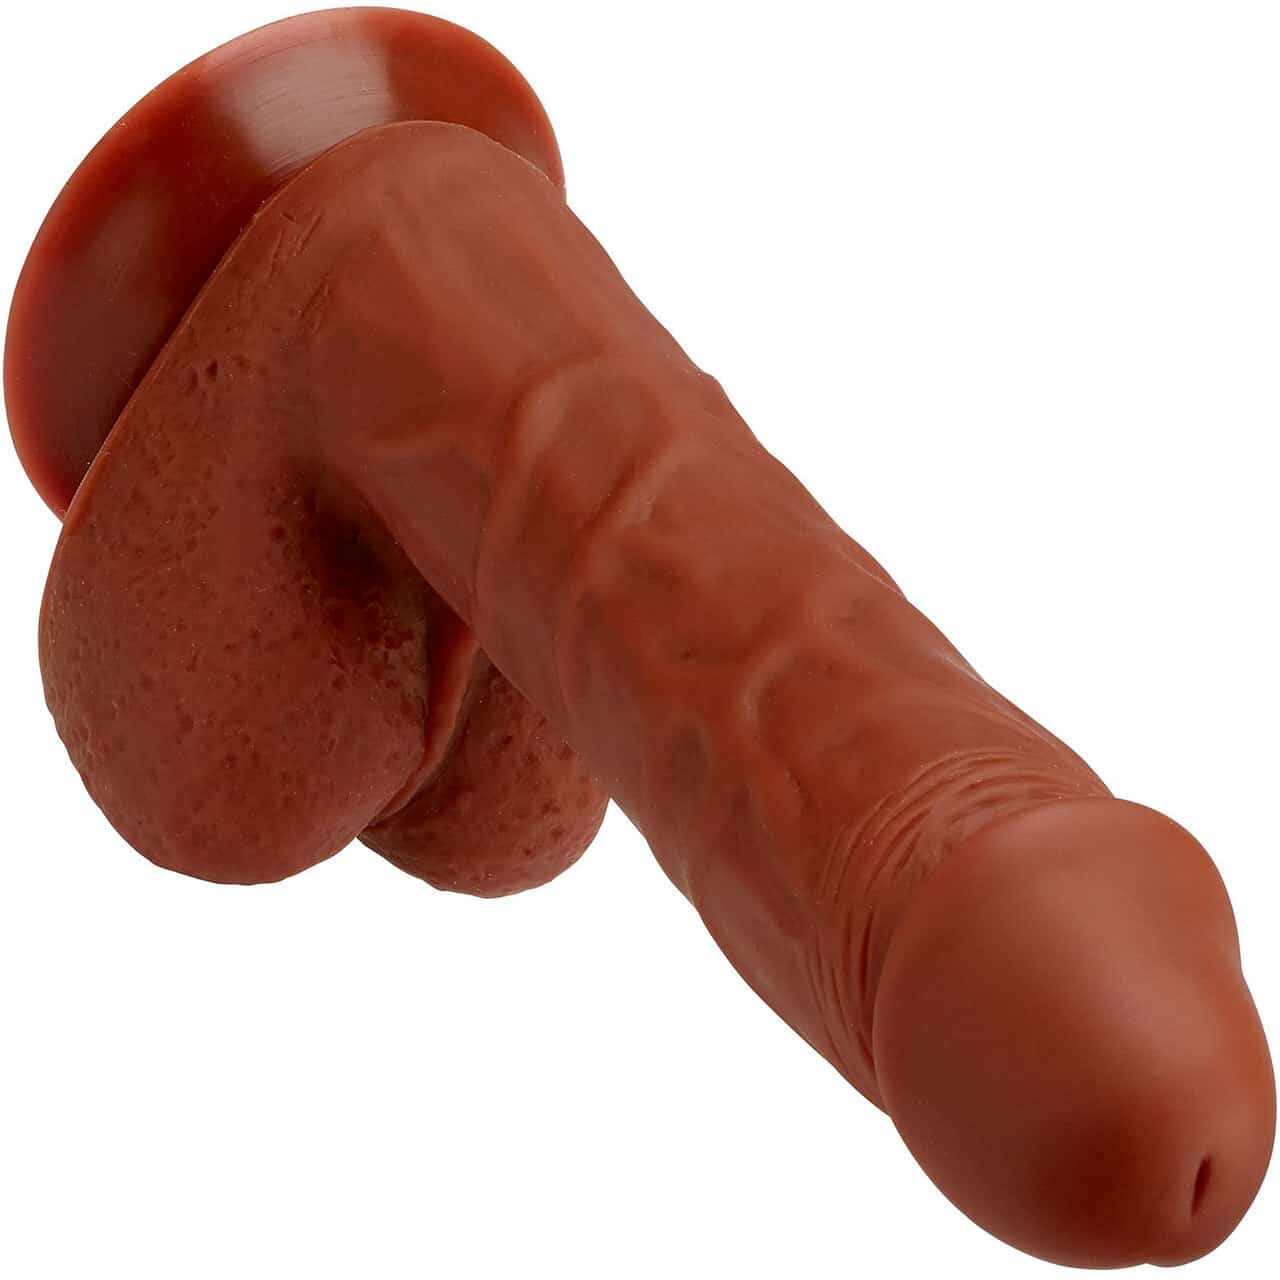 Product Cloud 9 Pro Sensual Suction Cup Dildo